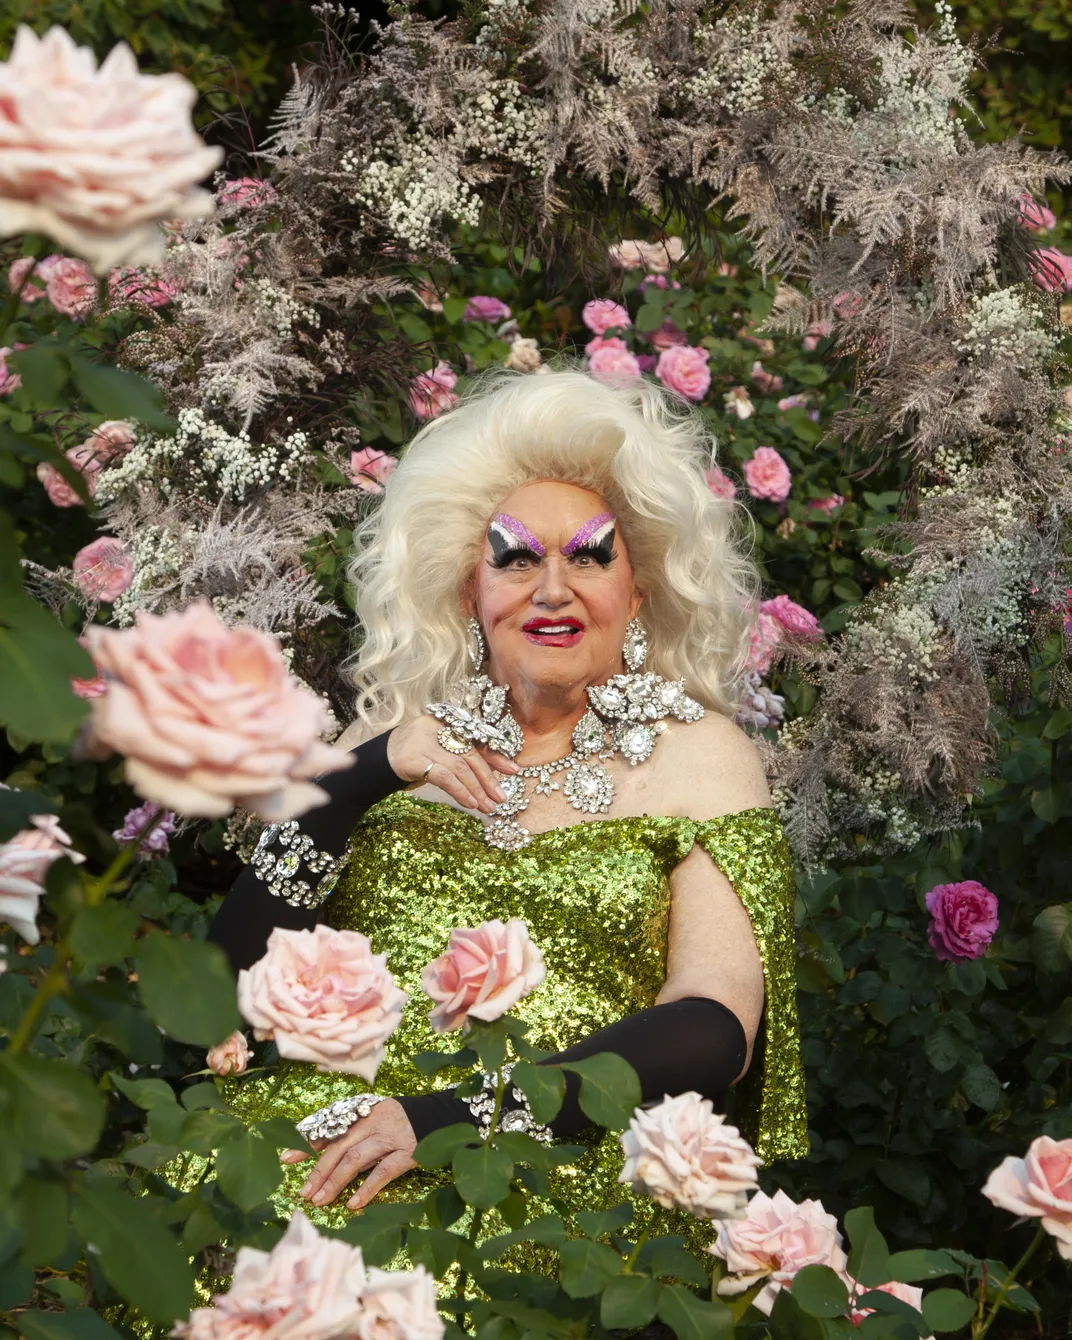 The 92-Year-Old Queen Who Shaped the History and Future of Drag